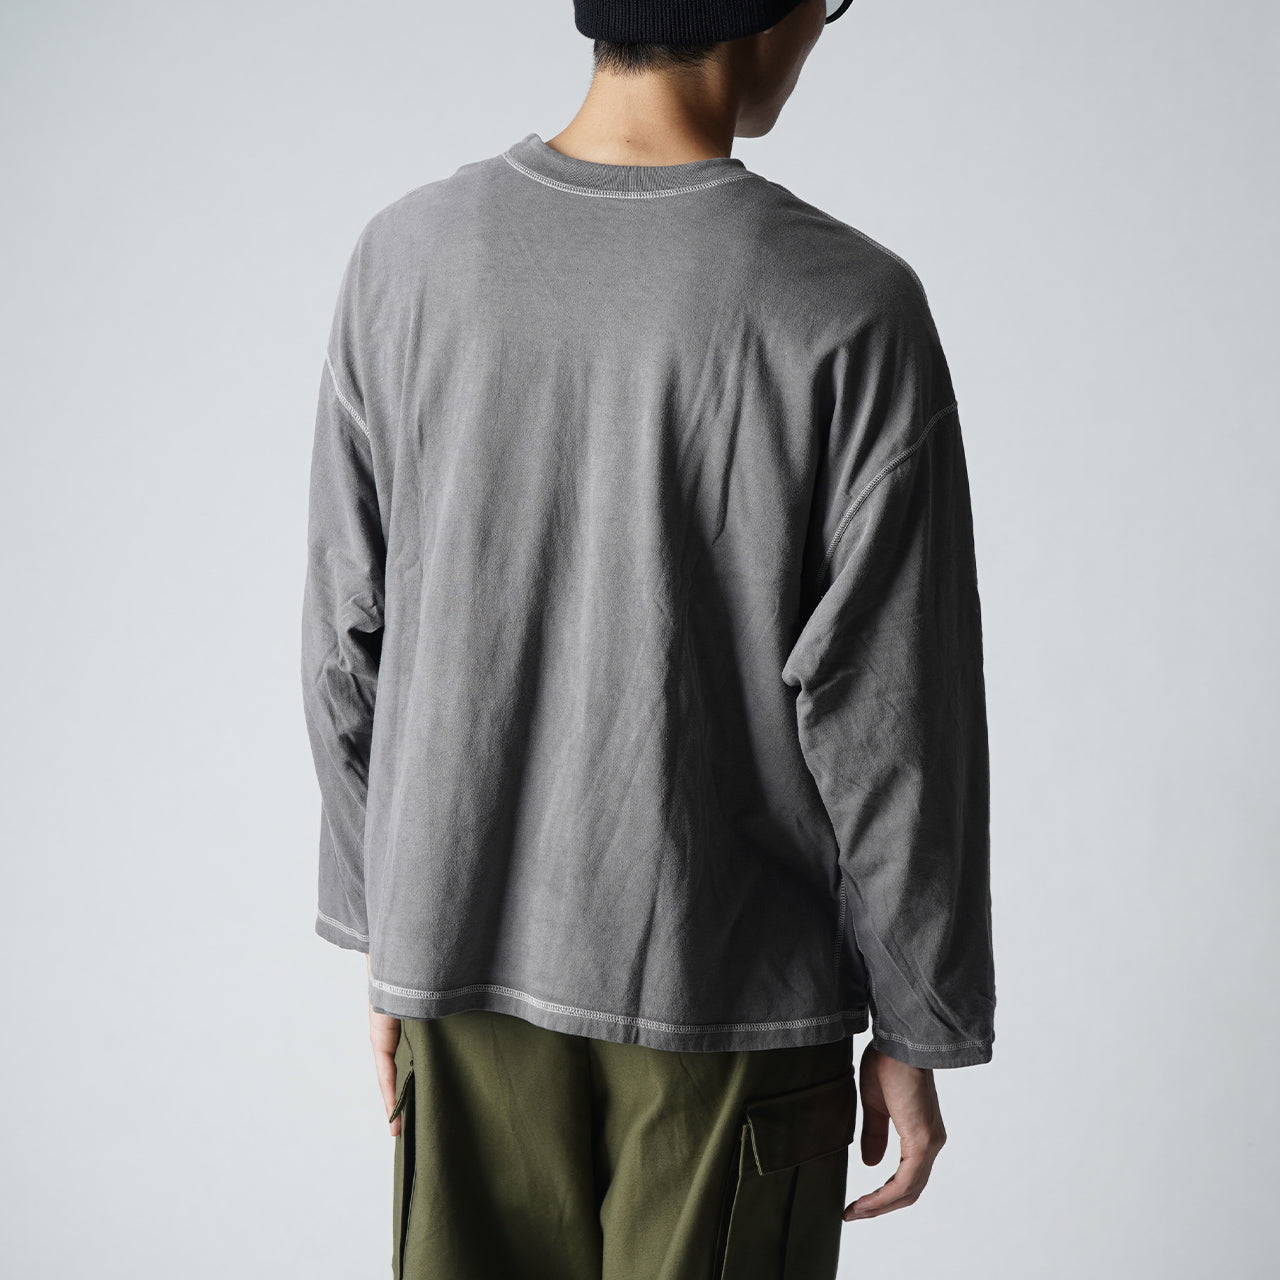 COLOmocT REVERSIBLE OVERDYED CREW NECK L/S